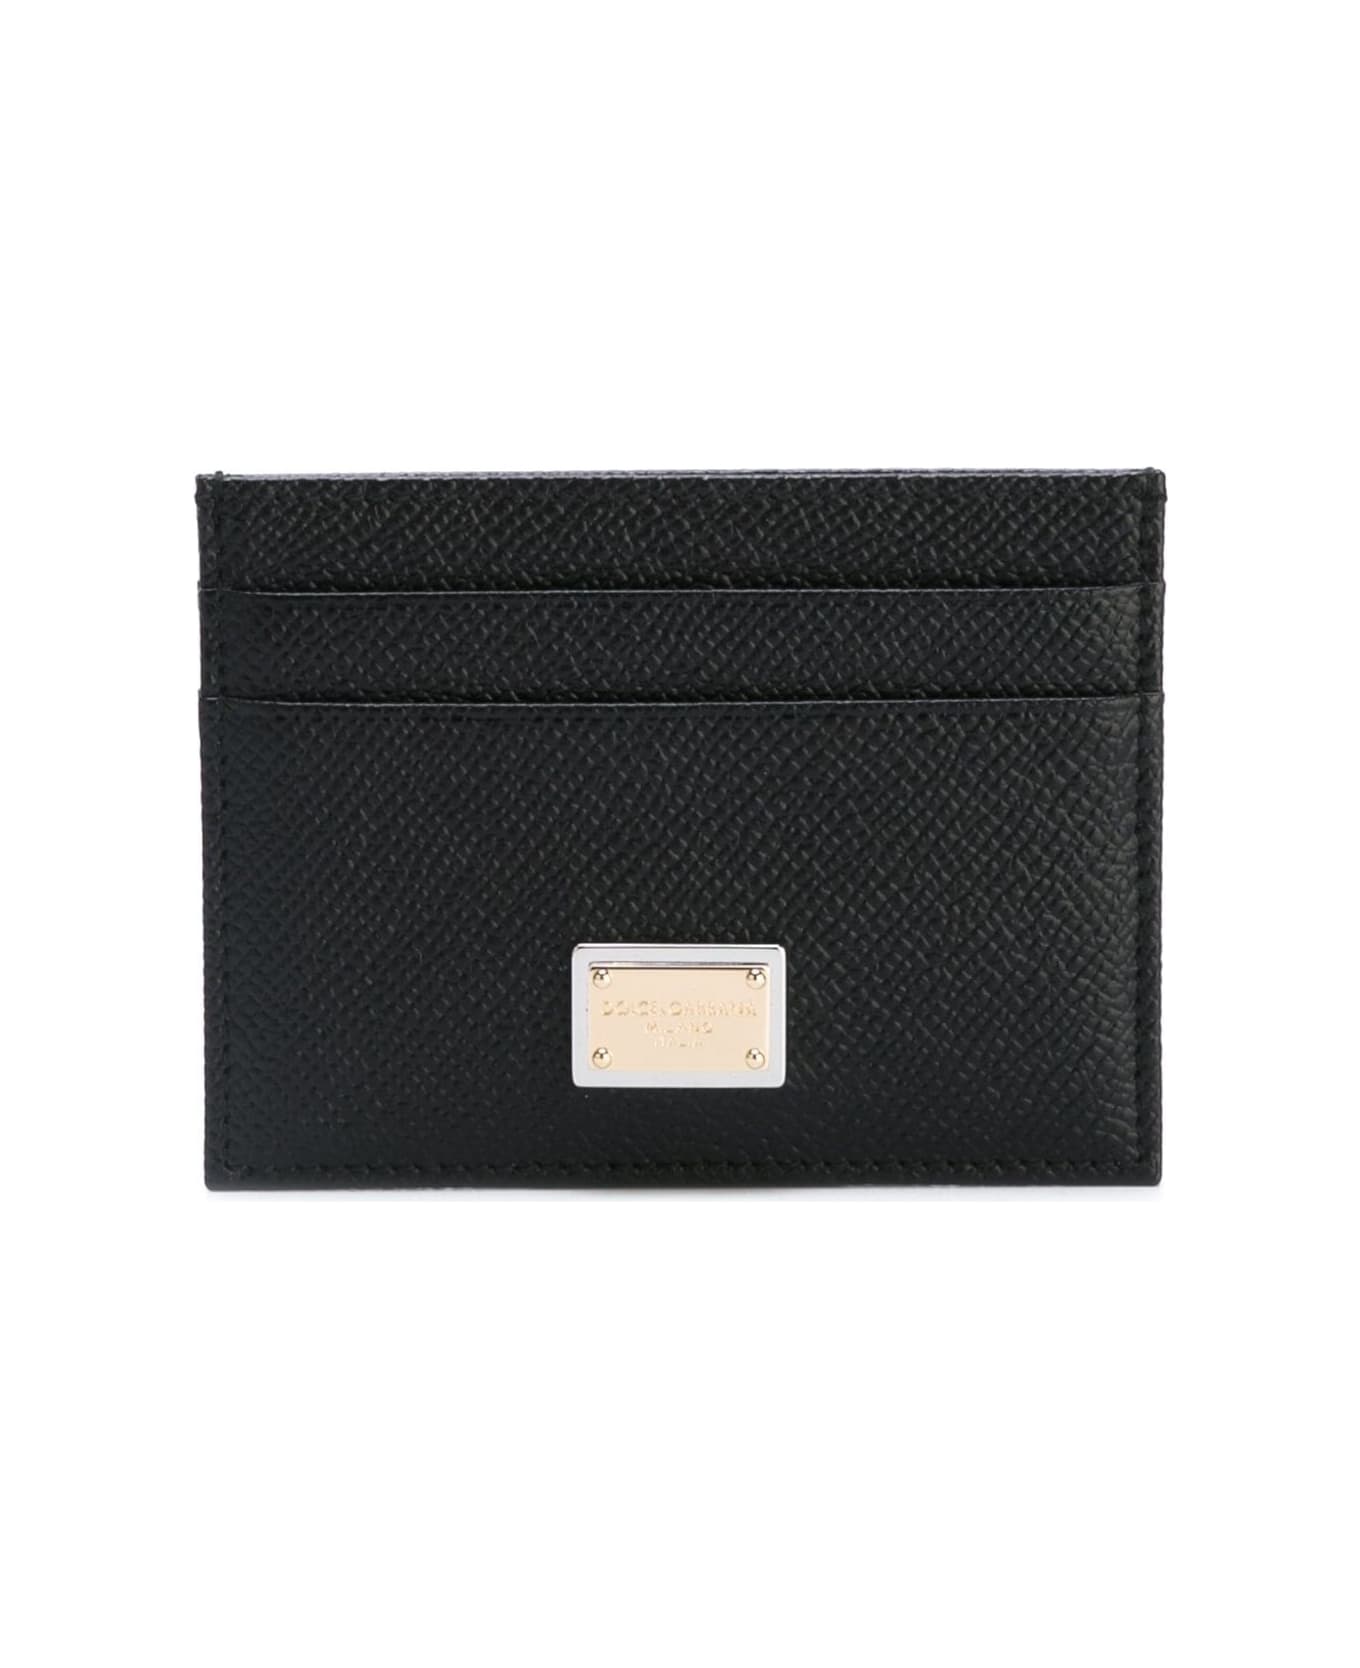 Dolce & Gabbana Card Holder In Hammered Leather With Logo - Black